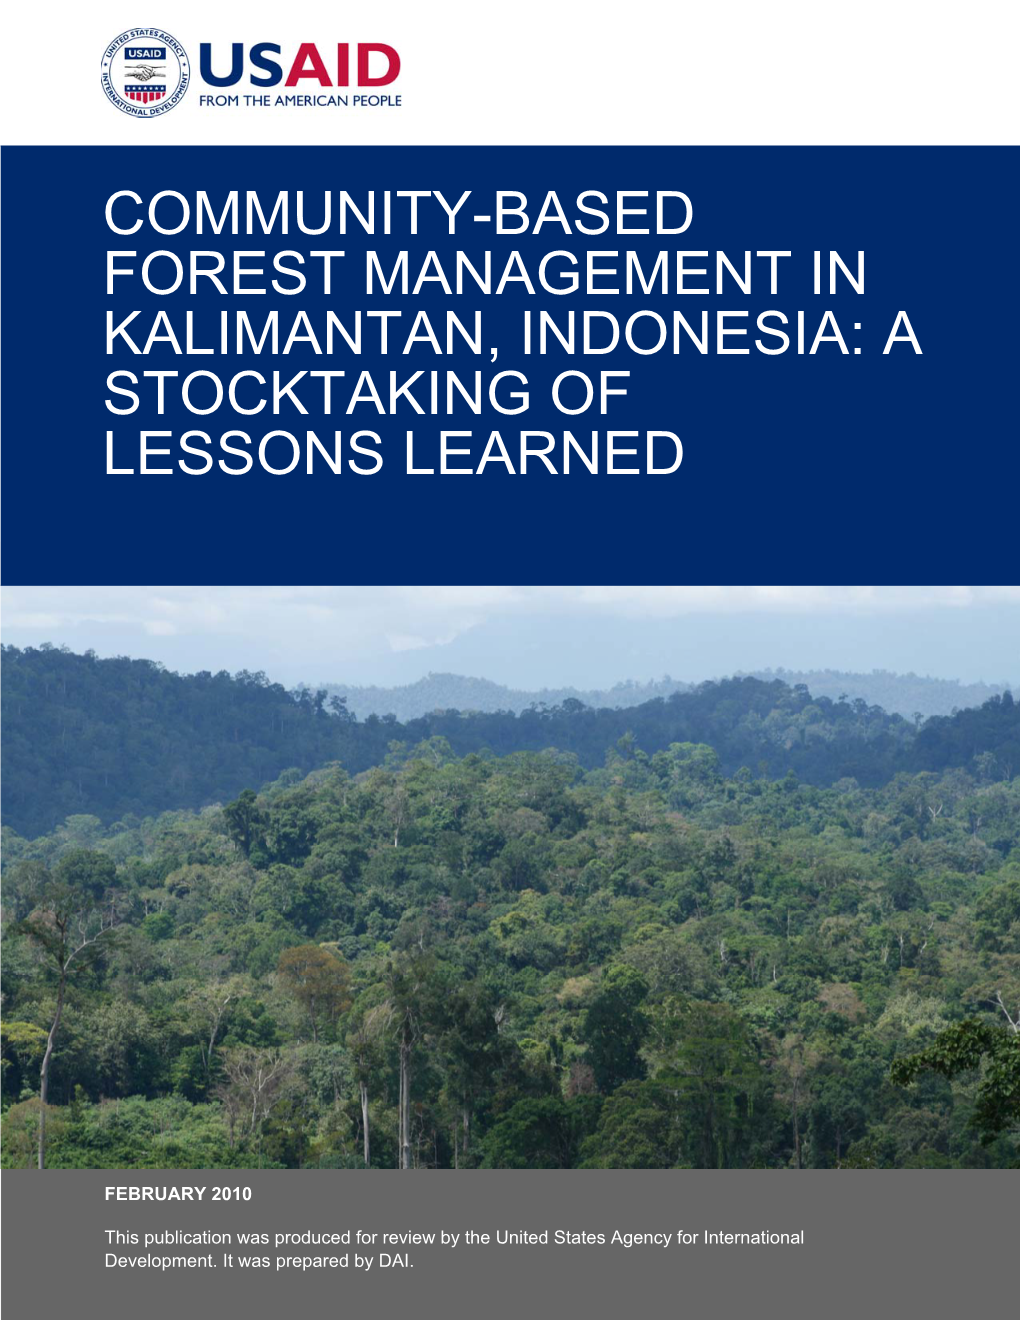 Community-Based Forest Management in Kalimantan, Indonesia: a Stocktaking of Lessons Learned